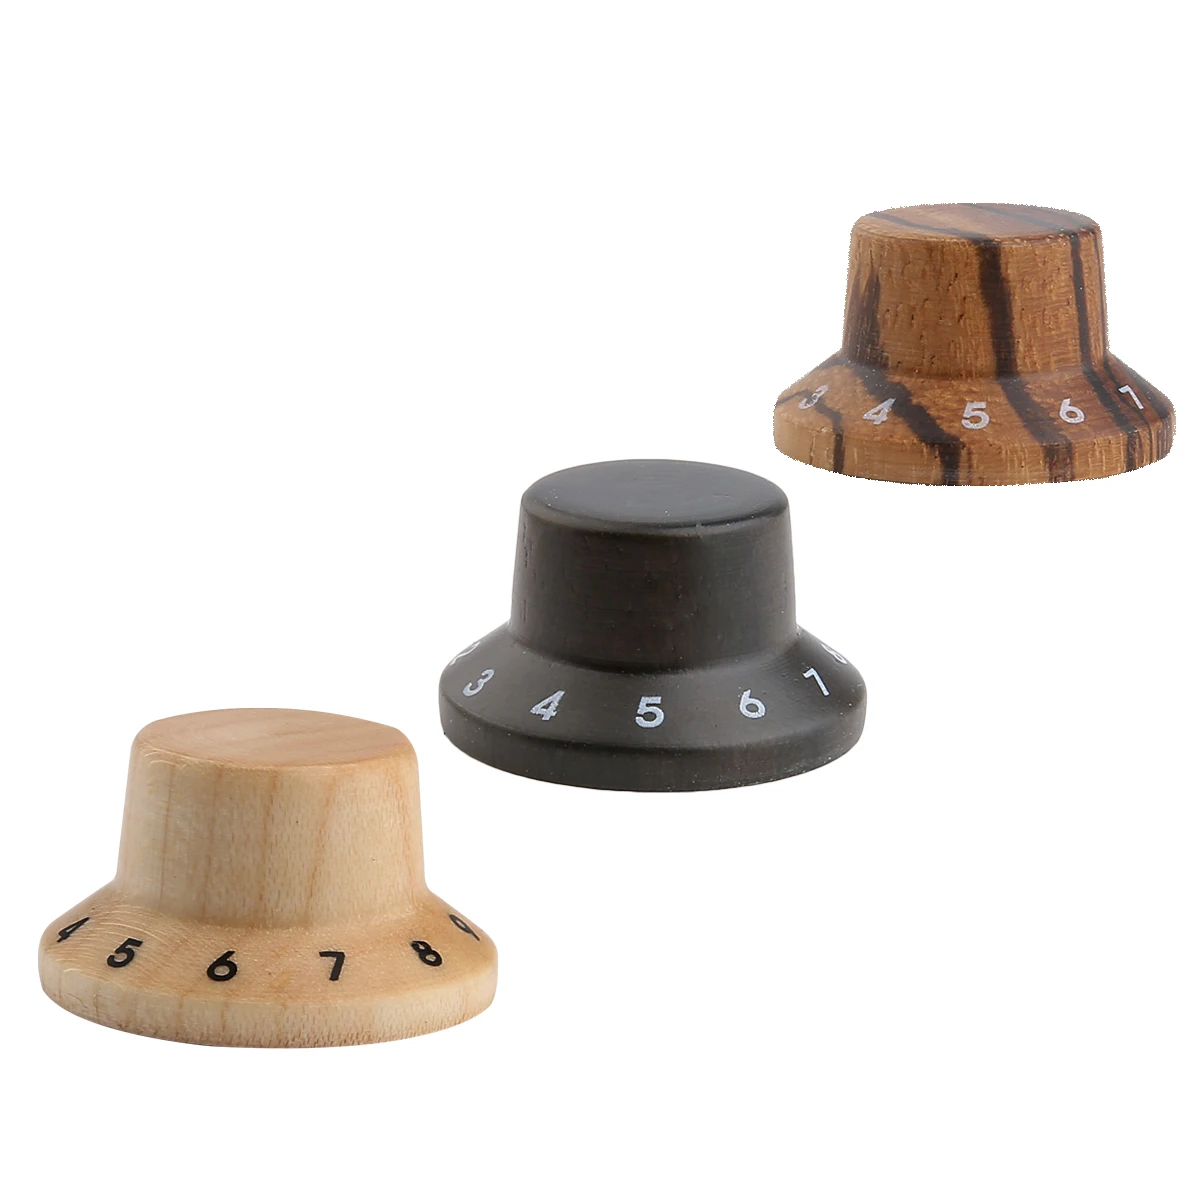 

Dopro Wooden Knobs for Strat Style Bell Knobs Wood Control Knobs Guitar Bass Top Hat Knobs with Numbers Maple/Rose/Zebra Wood